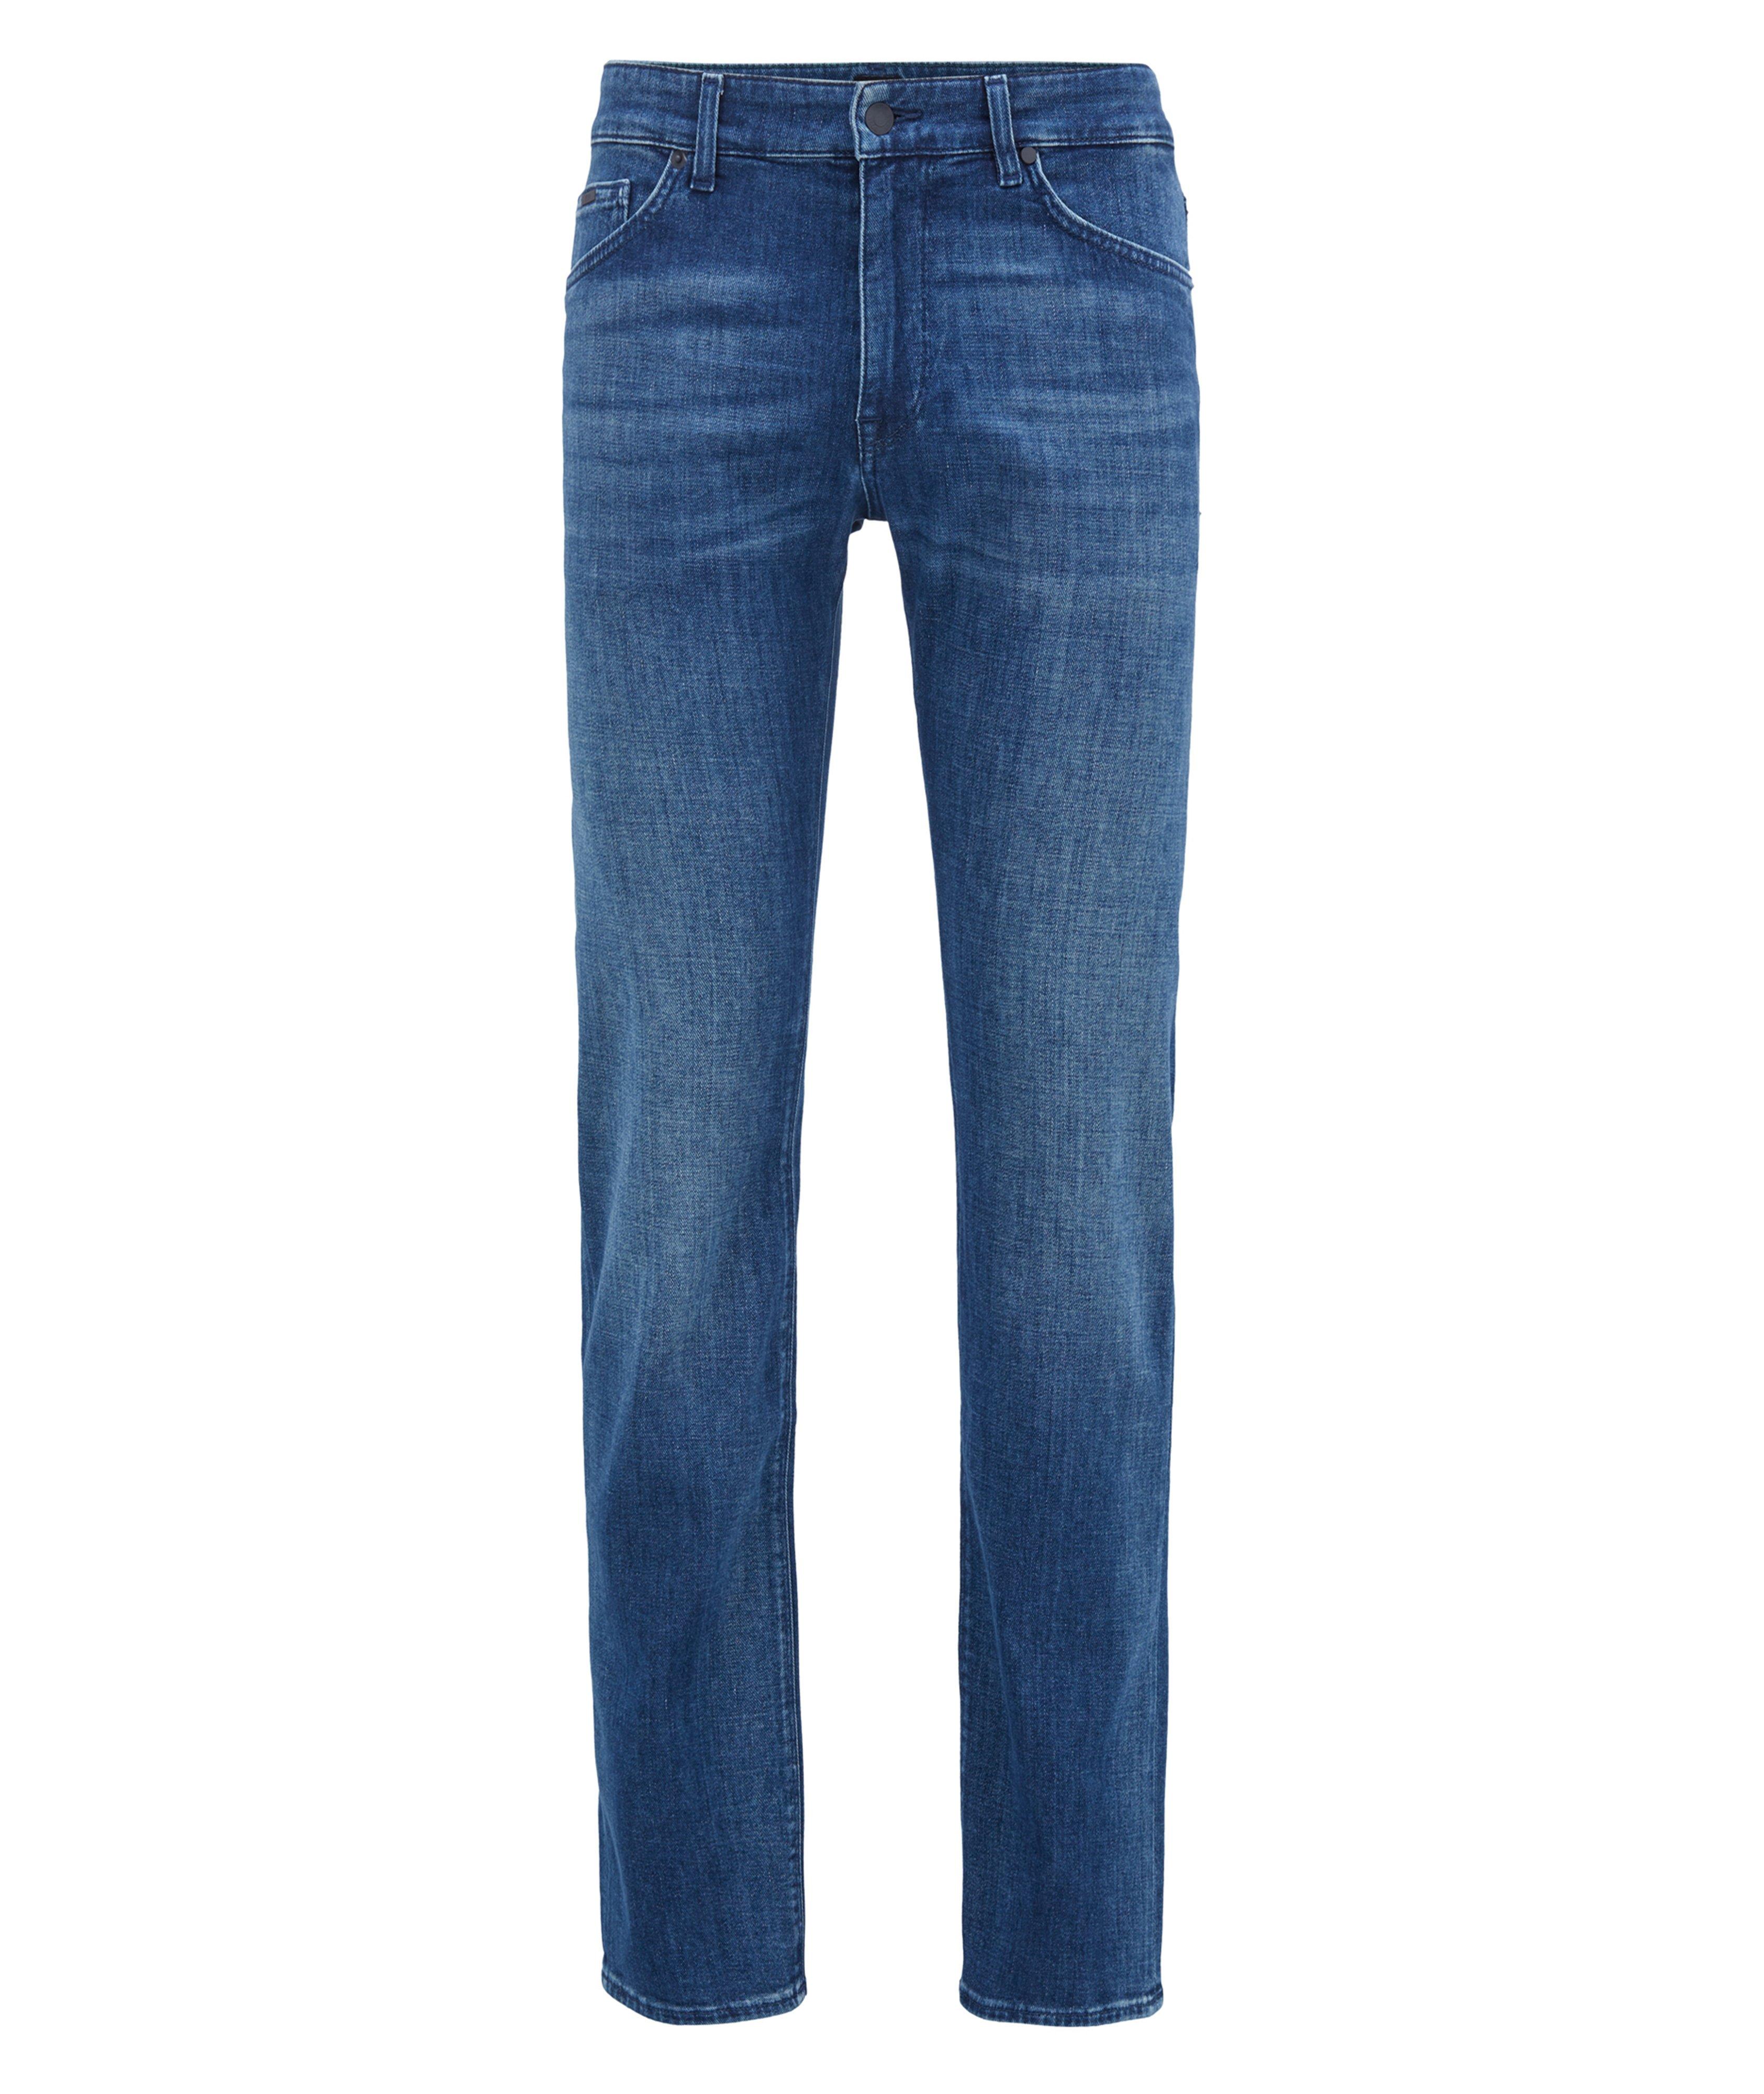 Maine3 Straight-Fit Jeans image 0